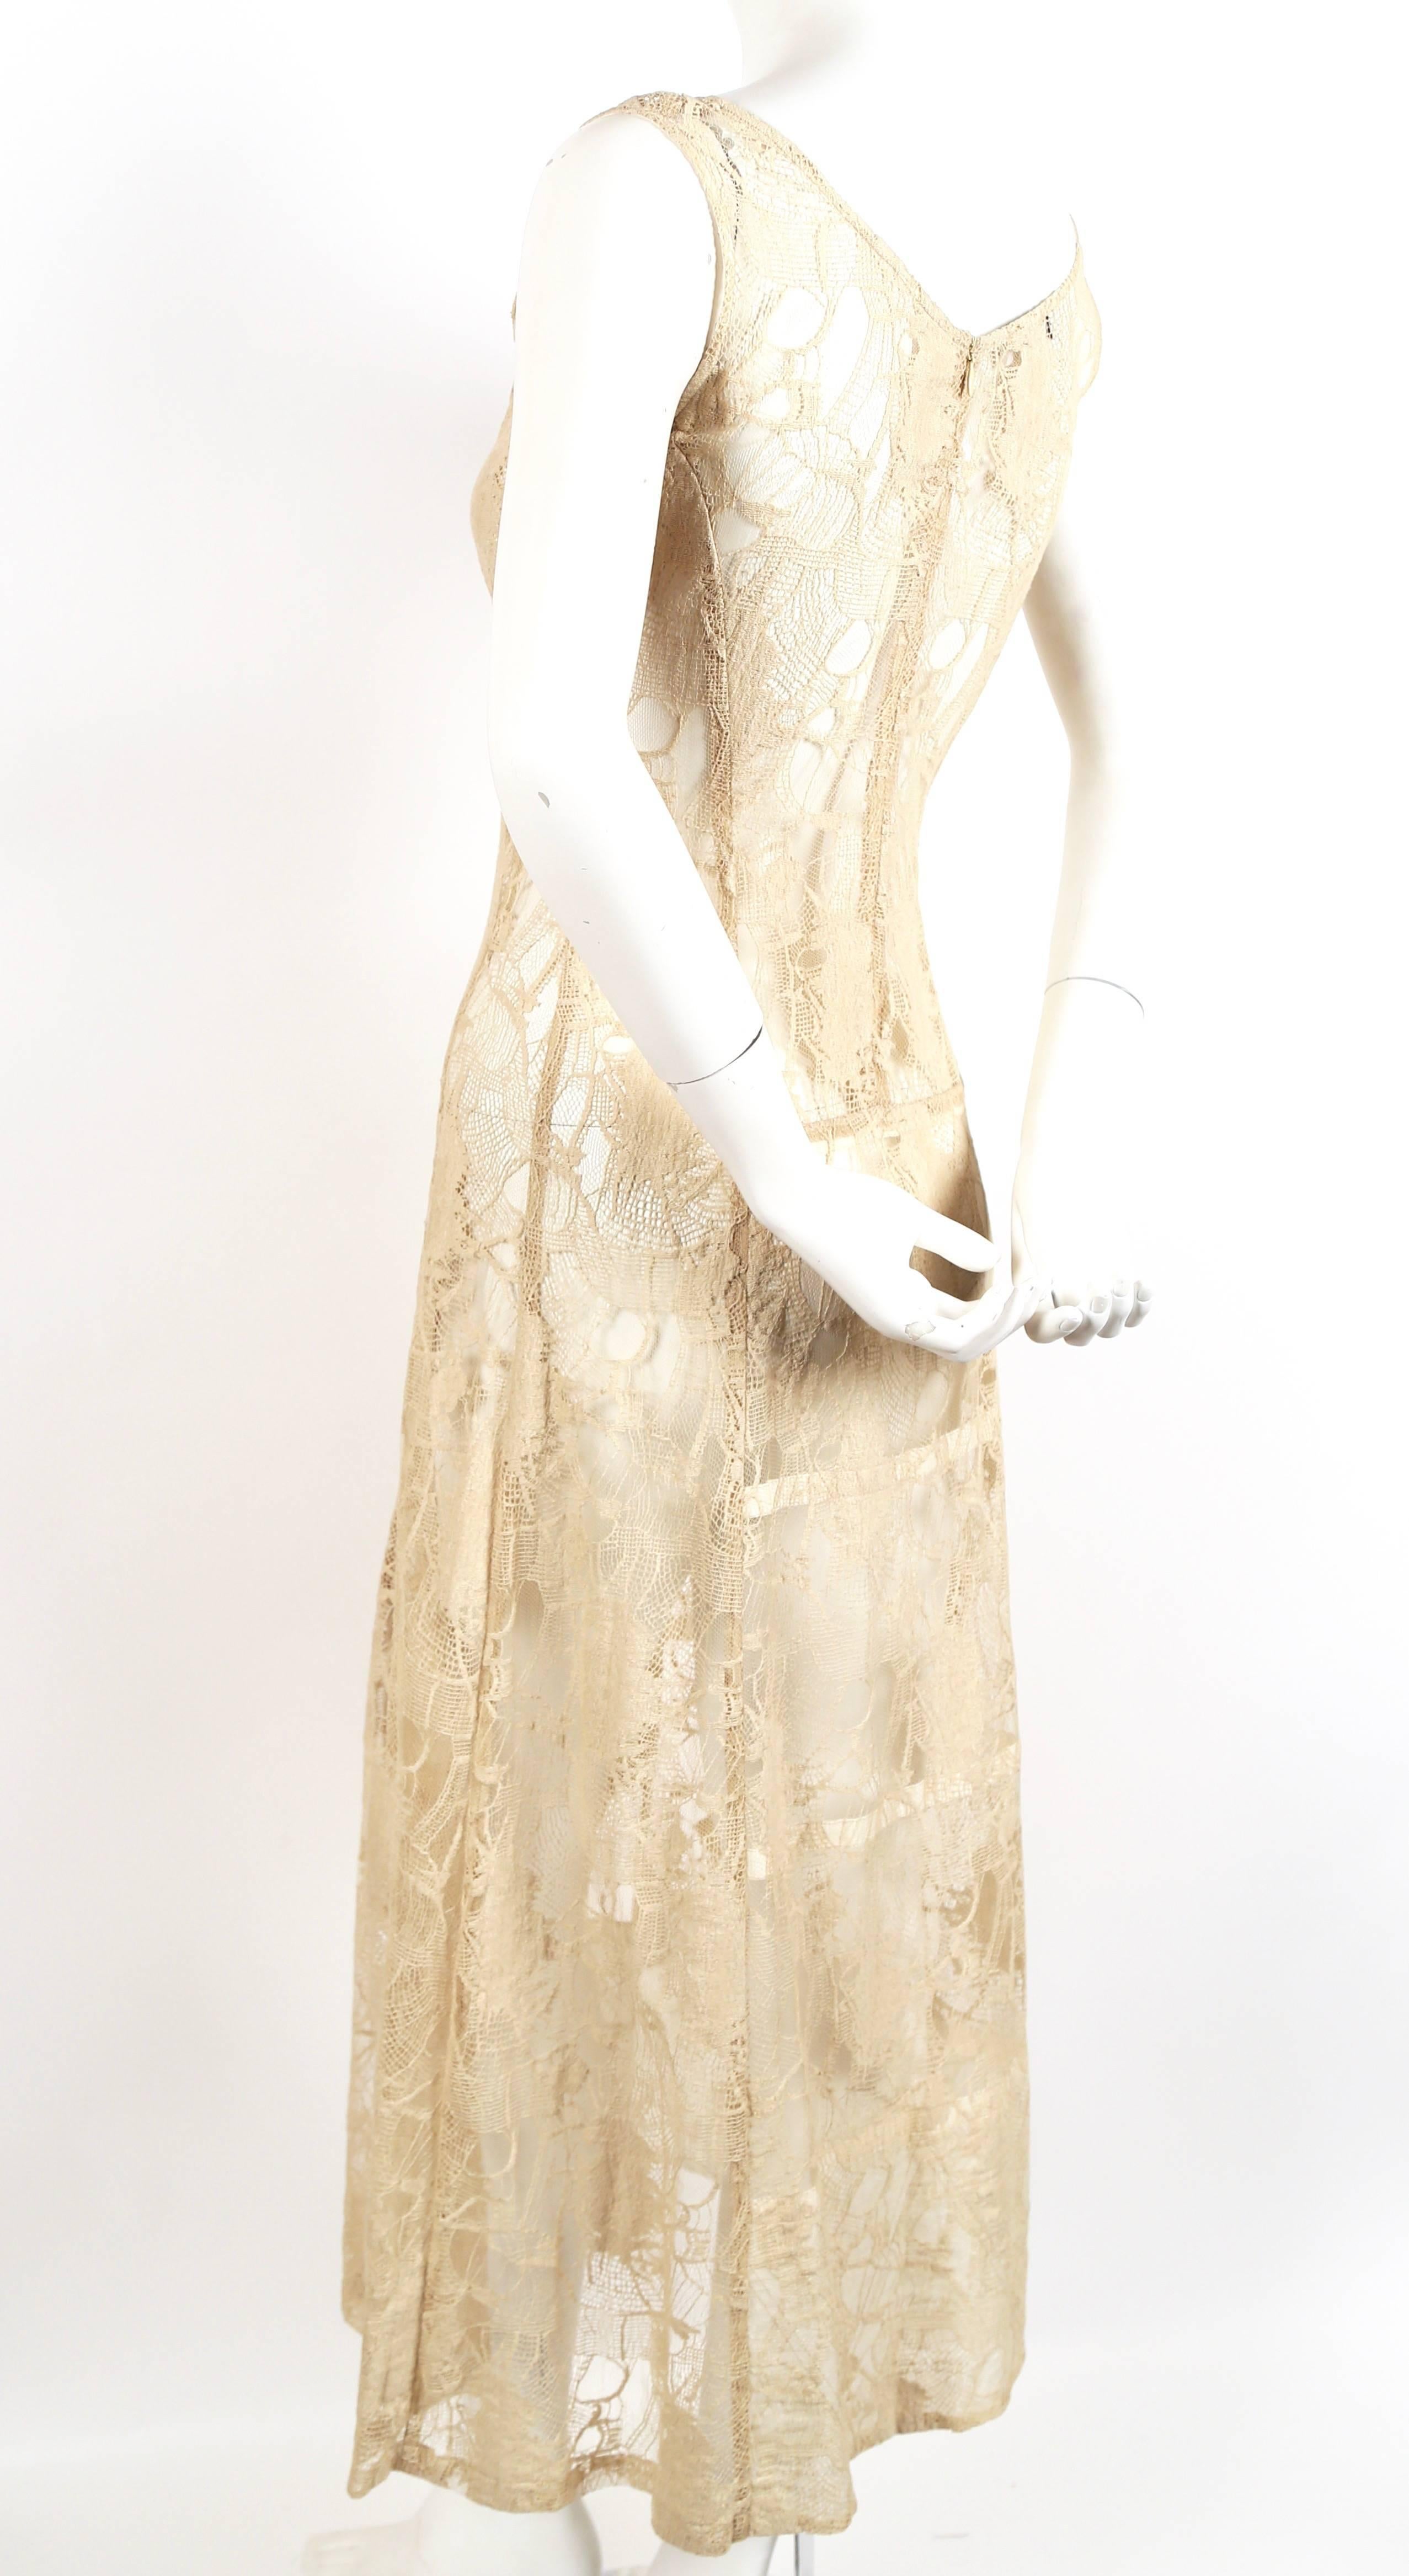 Beautiful cream lace semi sheer gown with very unique paneling from Dries Van Noten dating to the 1990's. Labeled a Belgian size 36. Approximate measurements: bust 33", waist 28", hips 40" and length is 50". Semi shallow arm